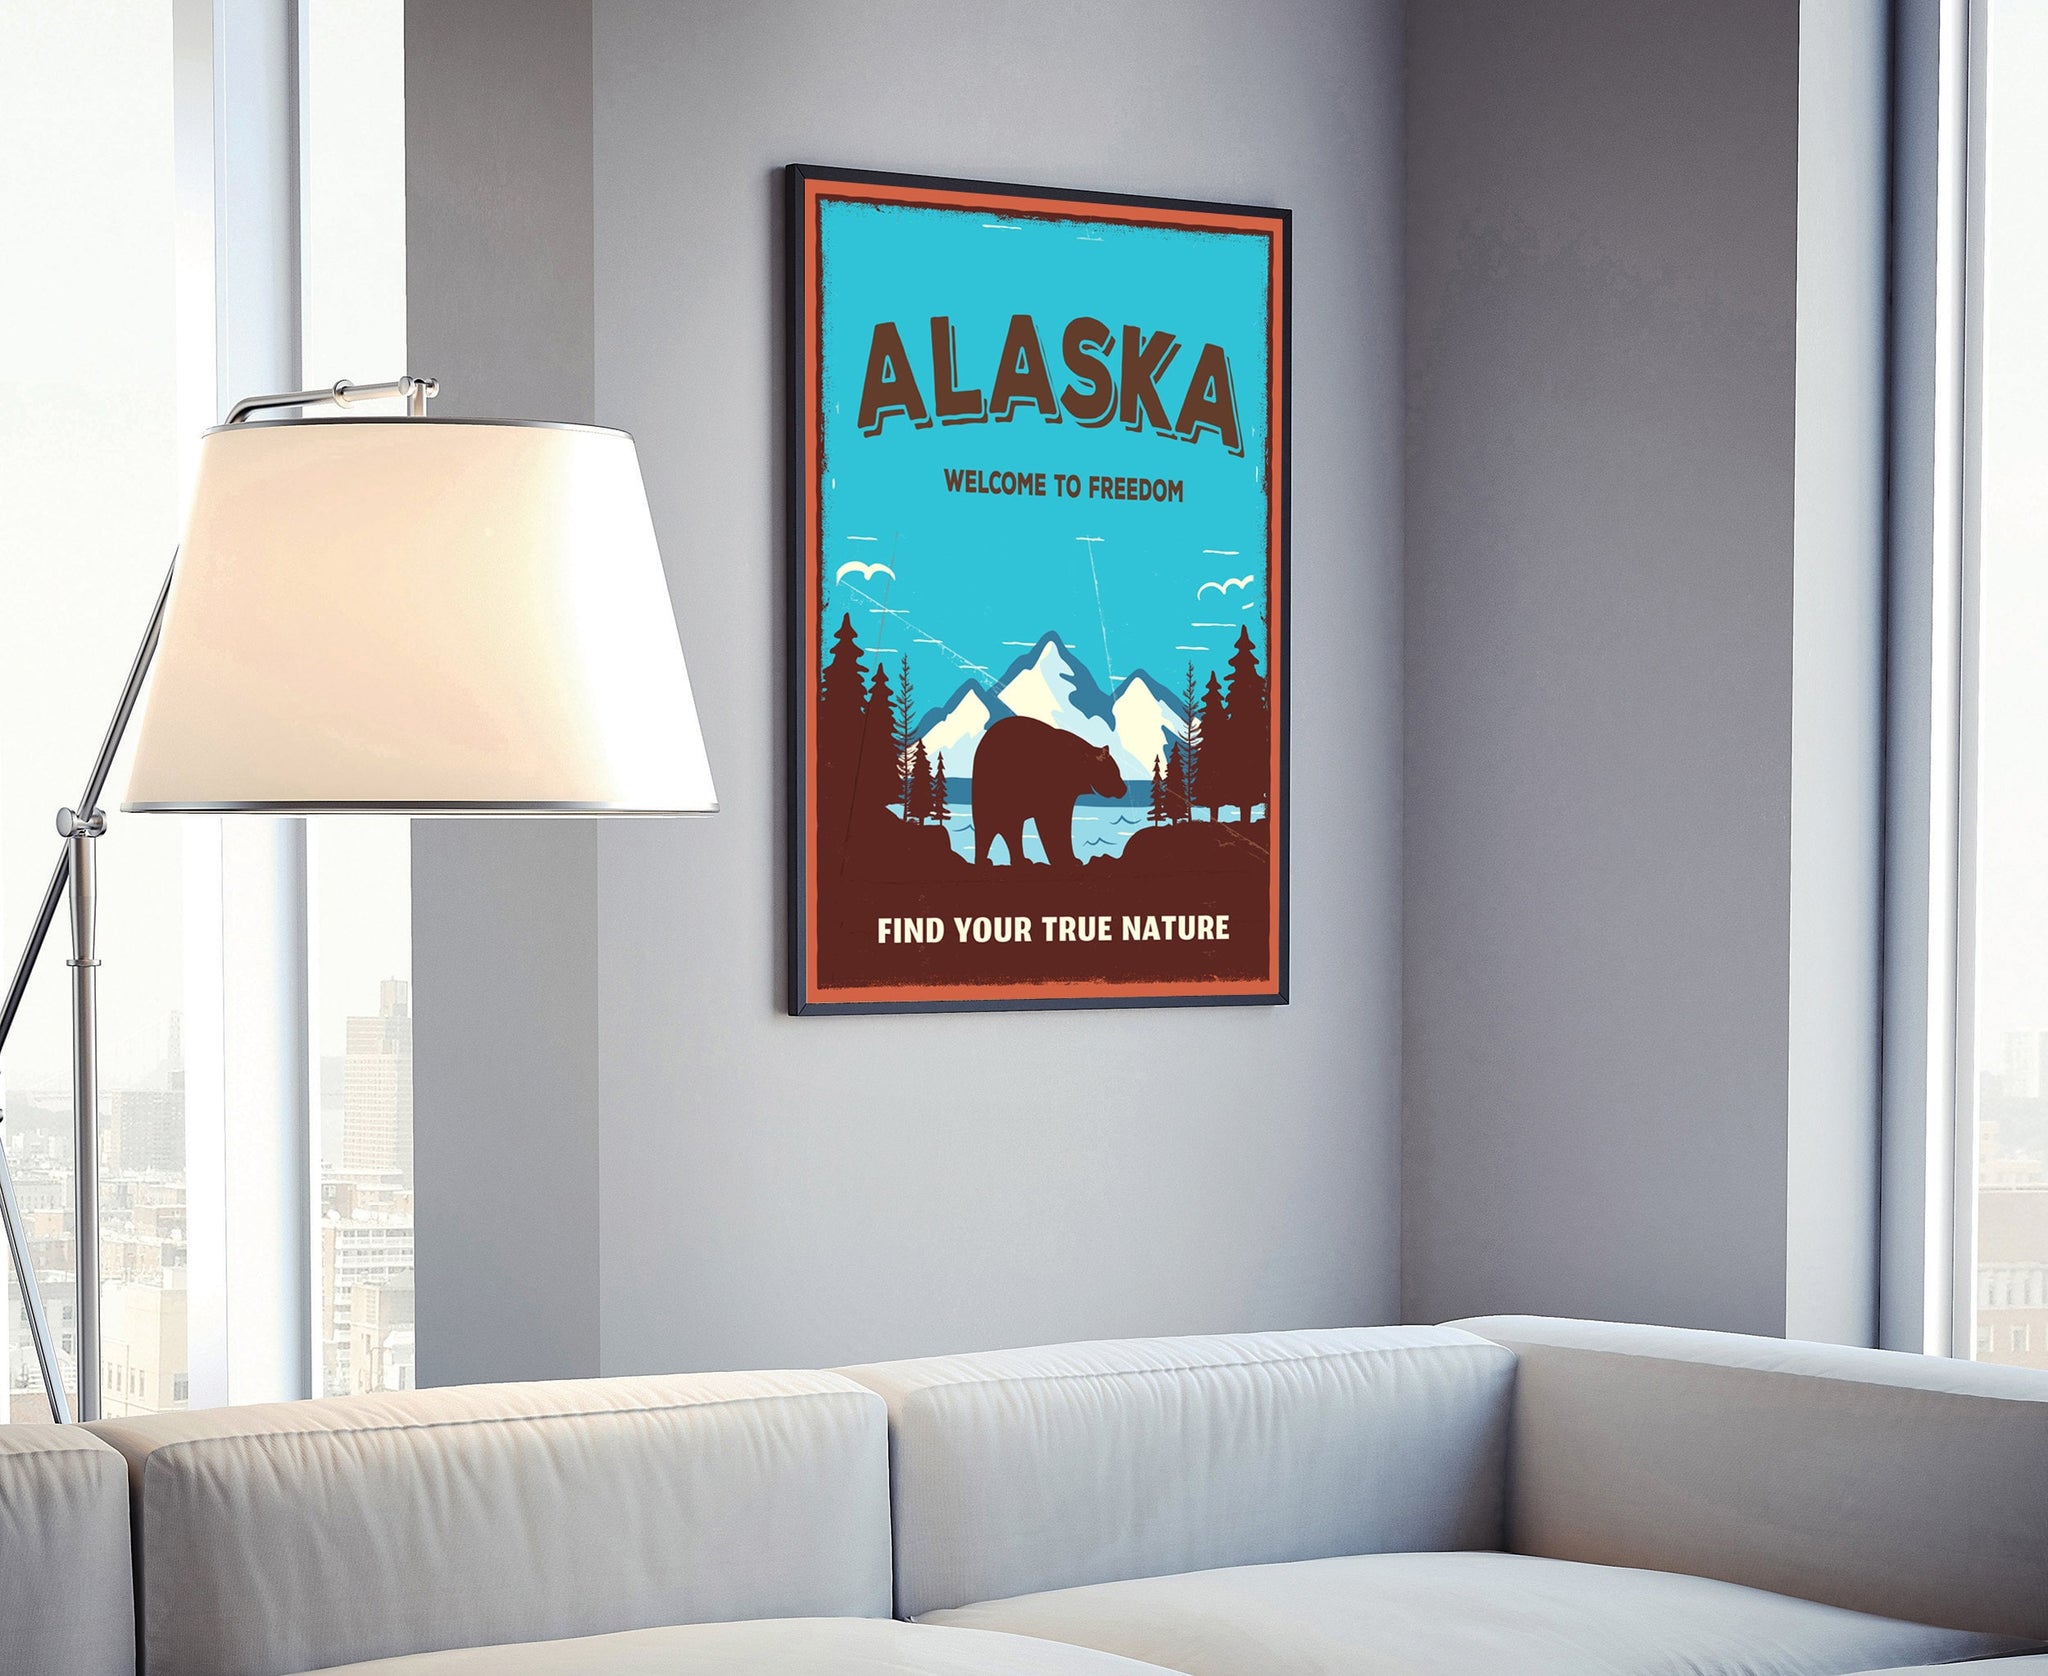 Retro Style Travel Poster, Alaska Vintage Rustic Poster Print, Home Wall Art, Office Wall Decor, Posters, Alaska, State Map Poster Printing